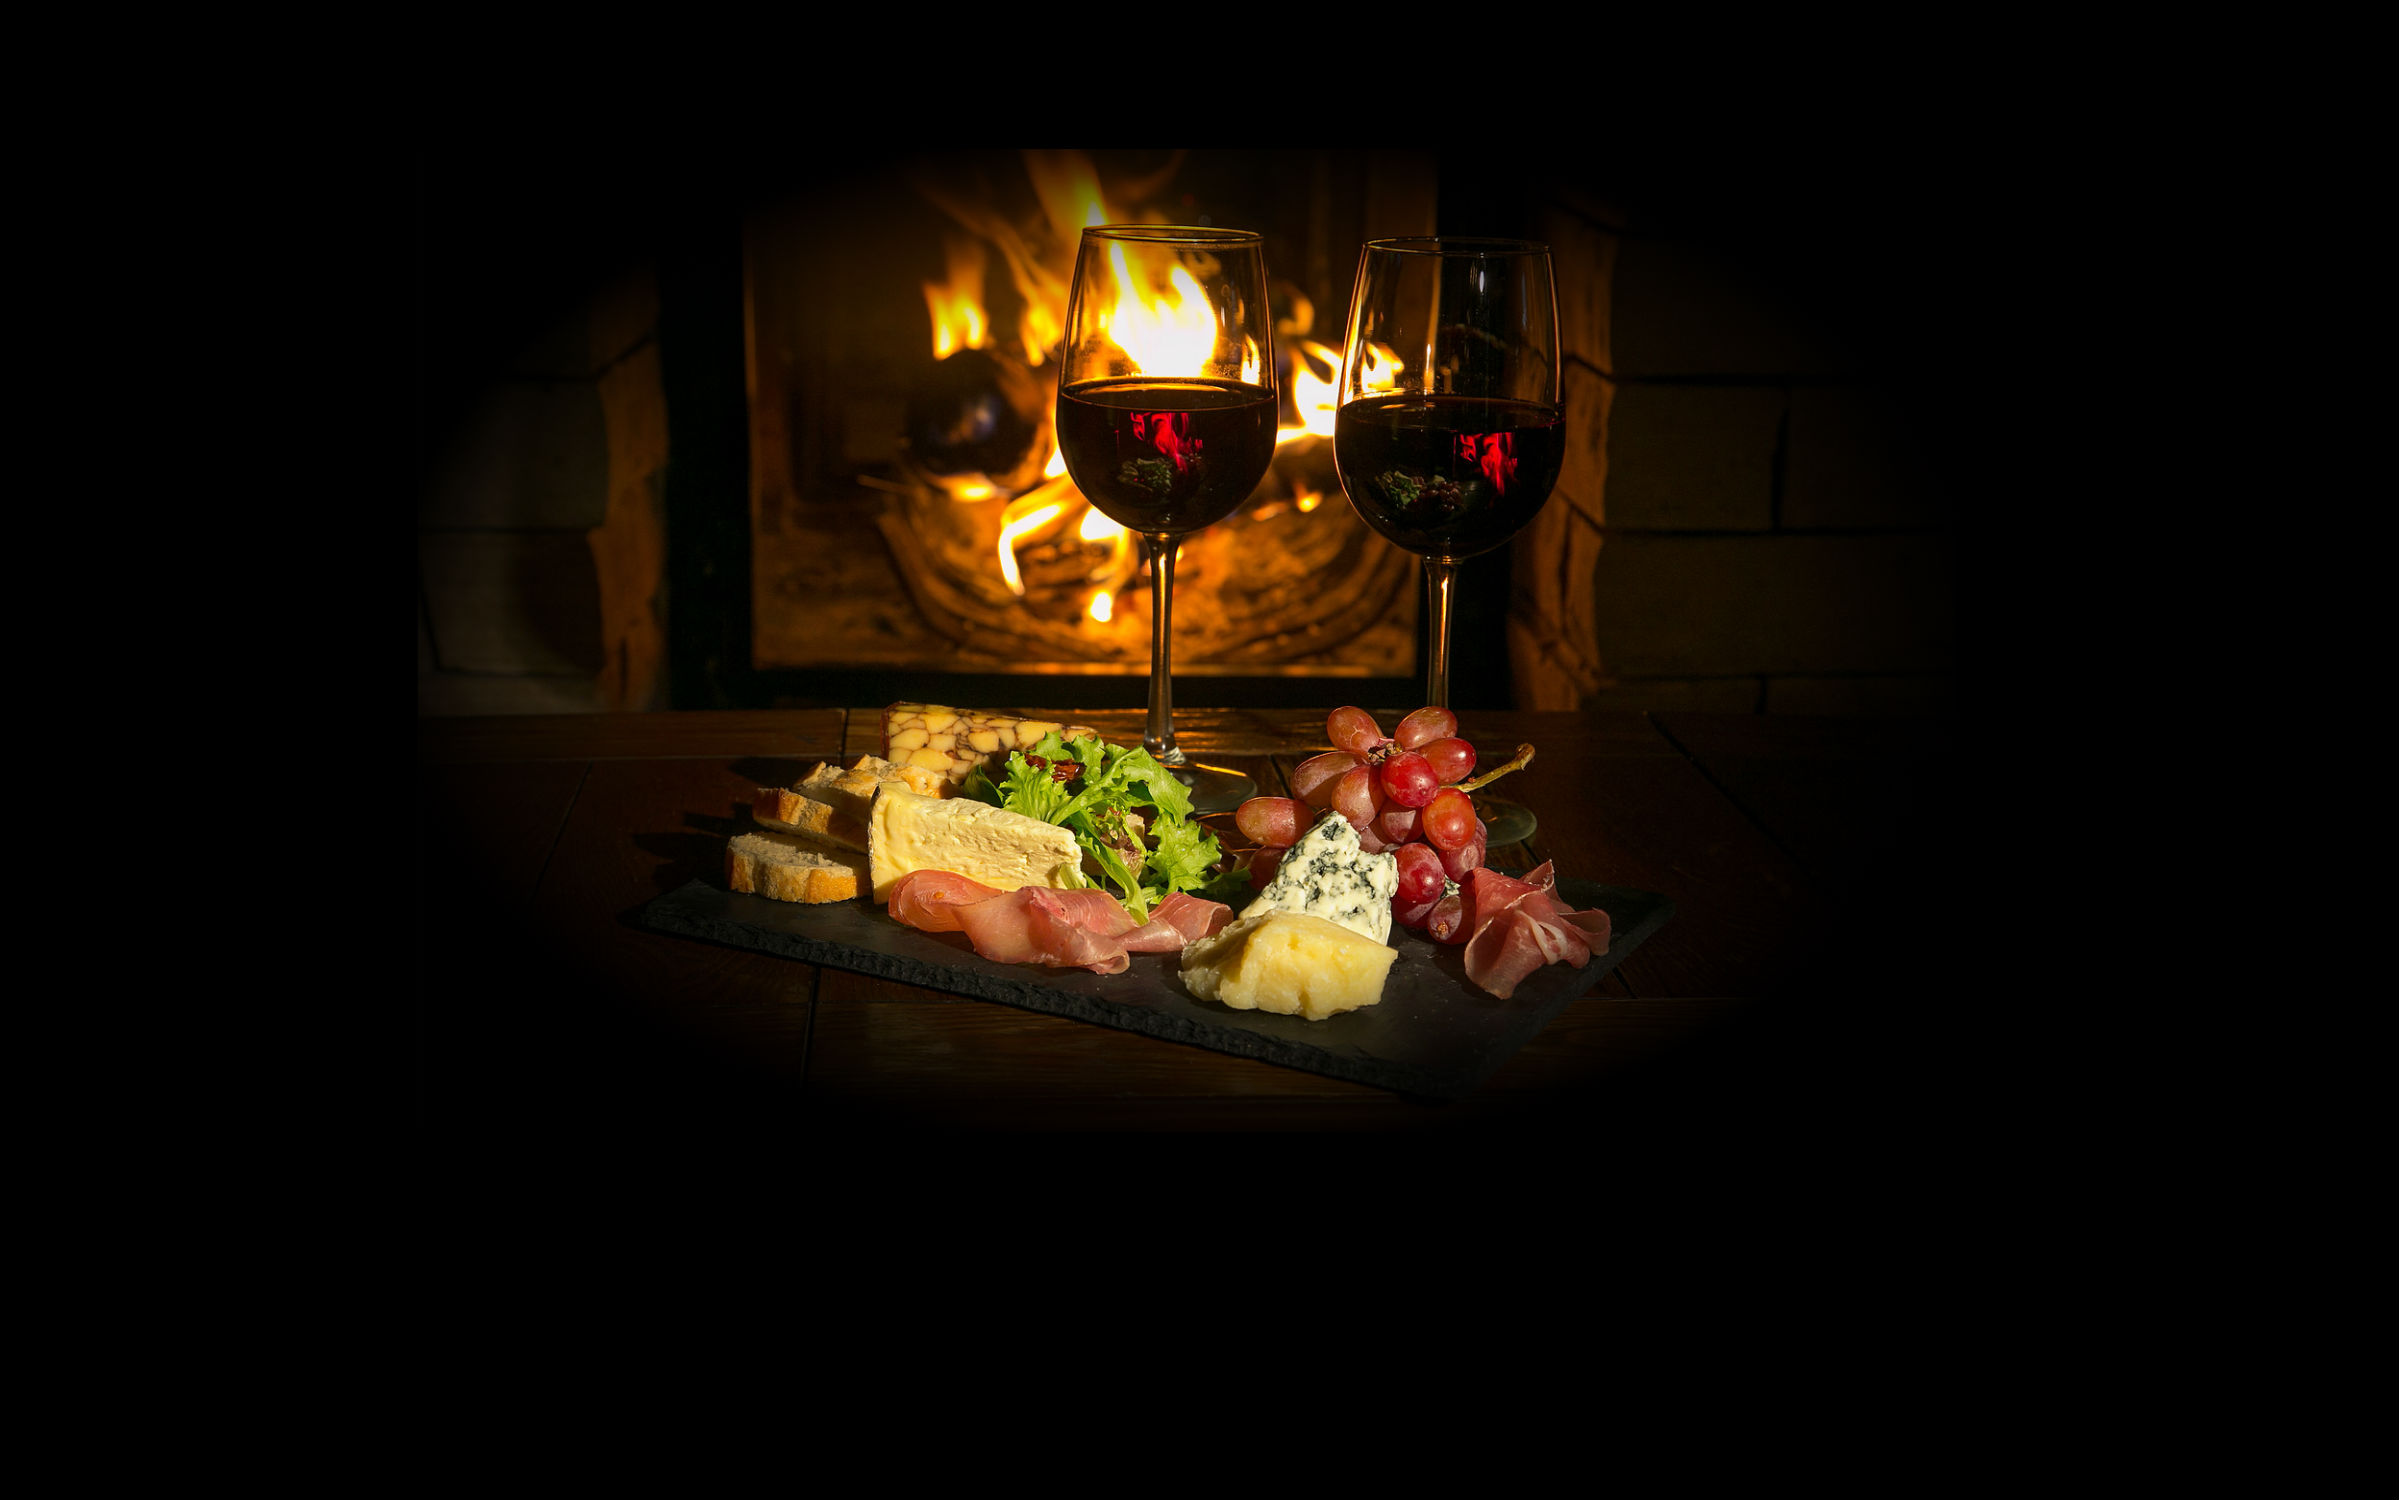 Two glasses of wine sit in front of a fire